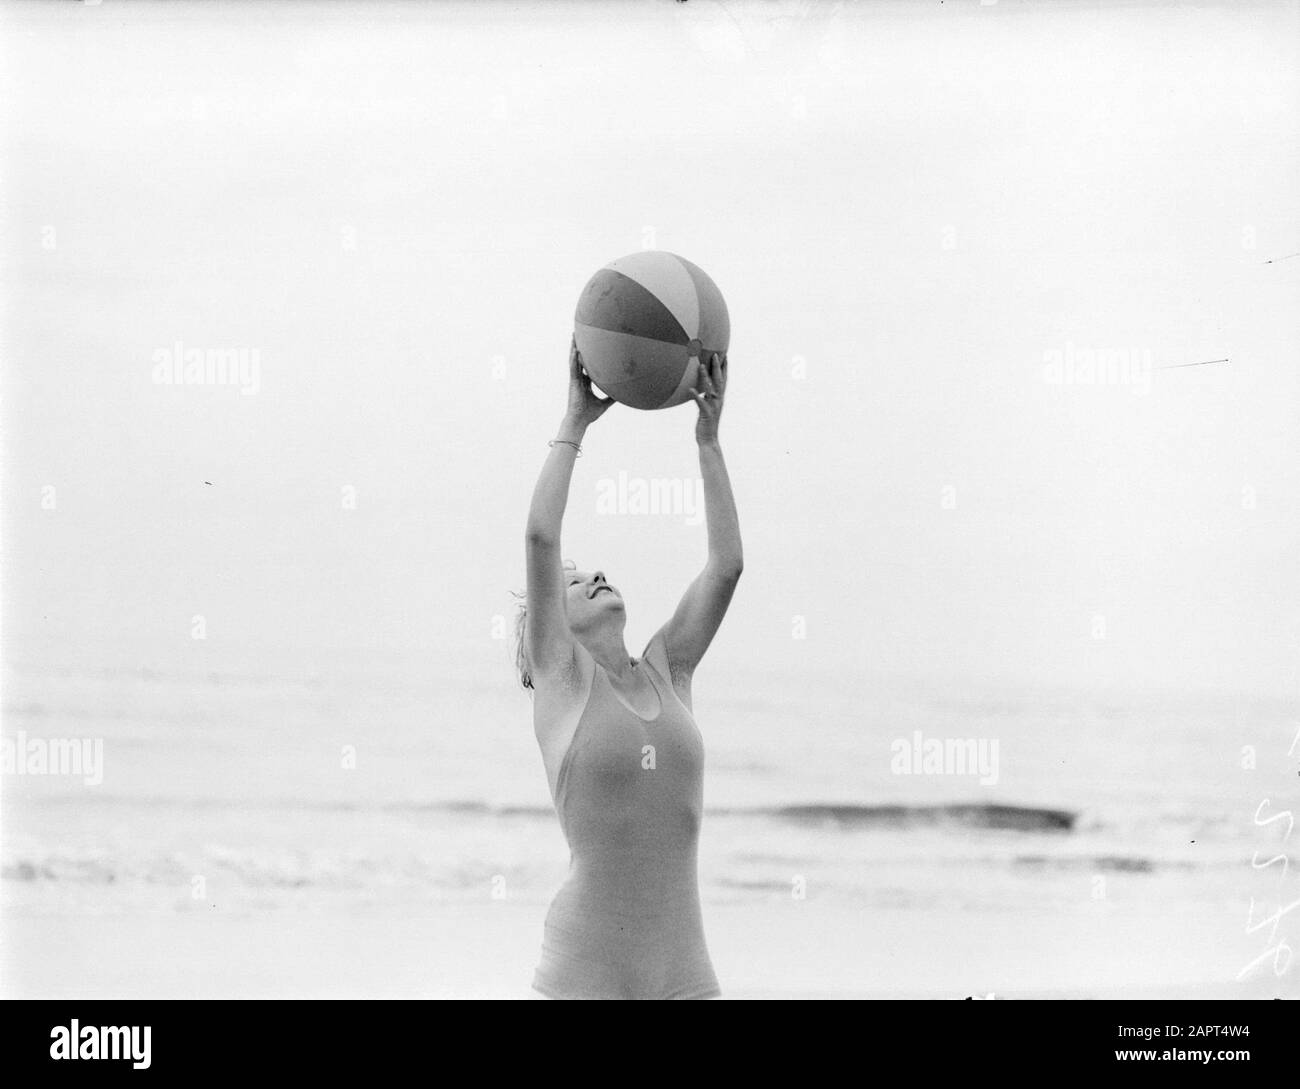 Reportage model  Eva Waldschmidt plays with a ball on the beach Date: 1932 Location: Noord-Holland, Zandvoort Keywords: balls, photo models, beaches Personal name: Waldschmidt, Eva Stock Photo